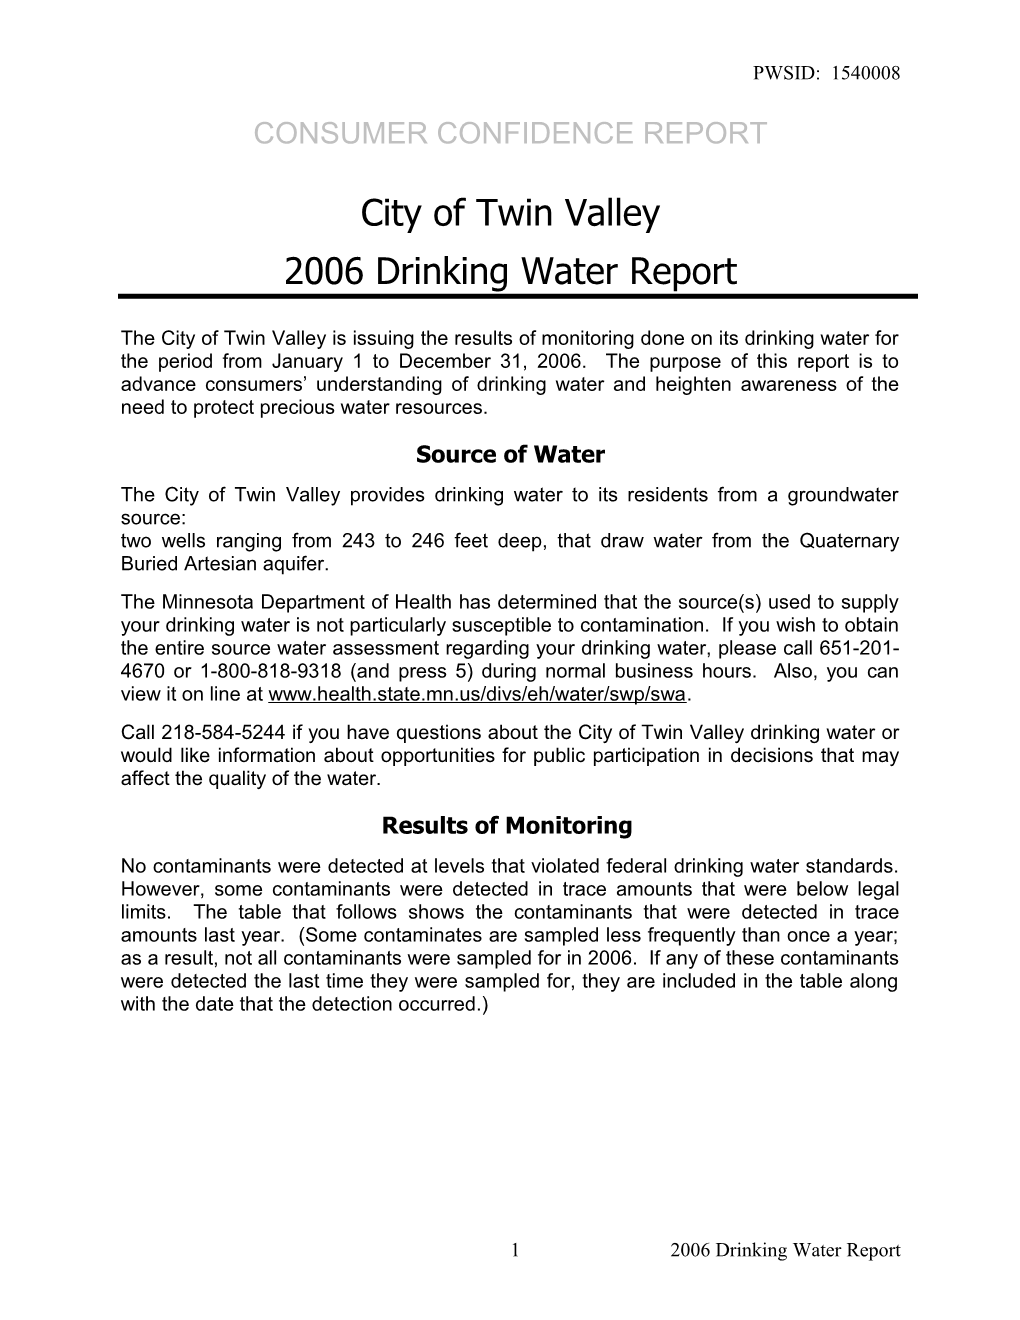 City of Twin Valley